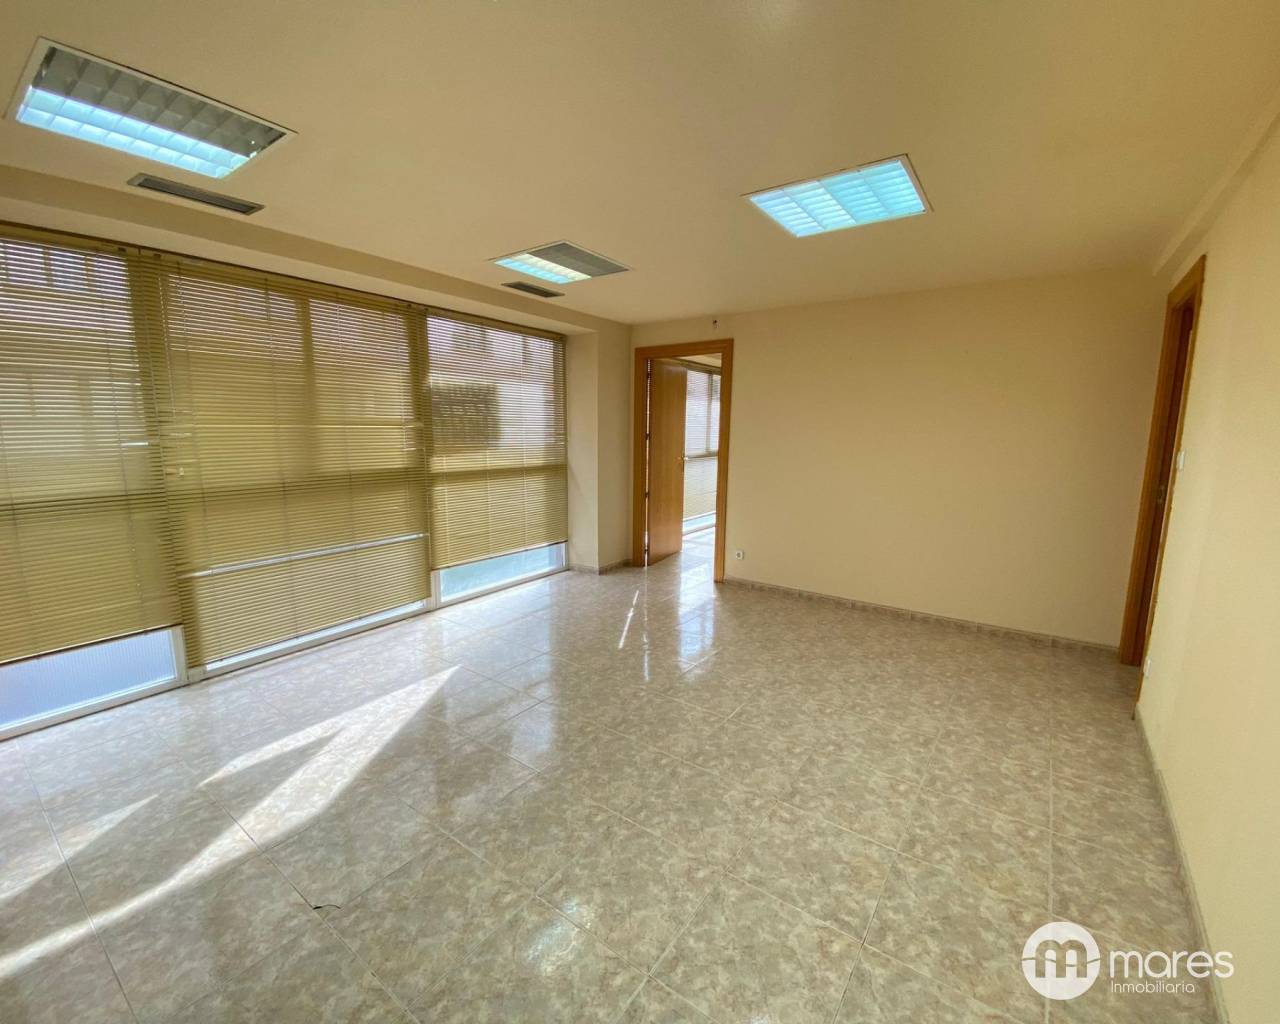 Office - Long time Rental - Elche - Centro